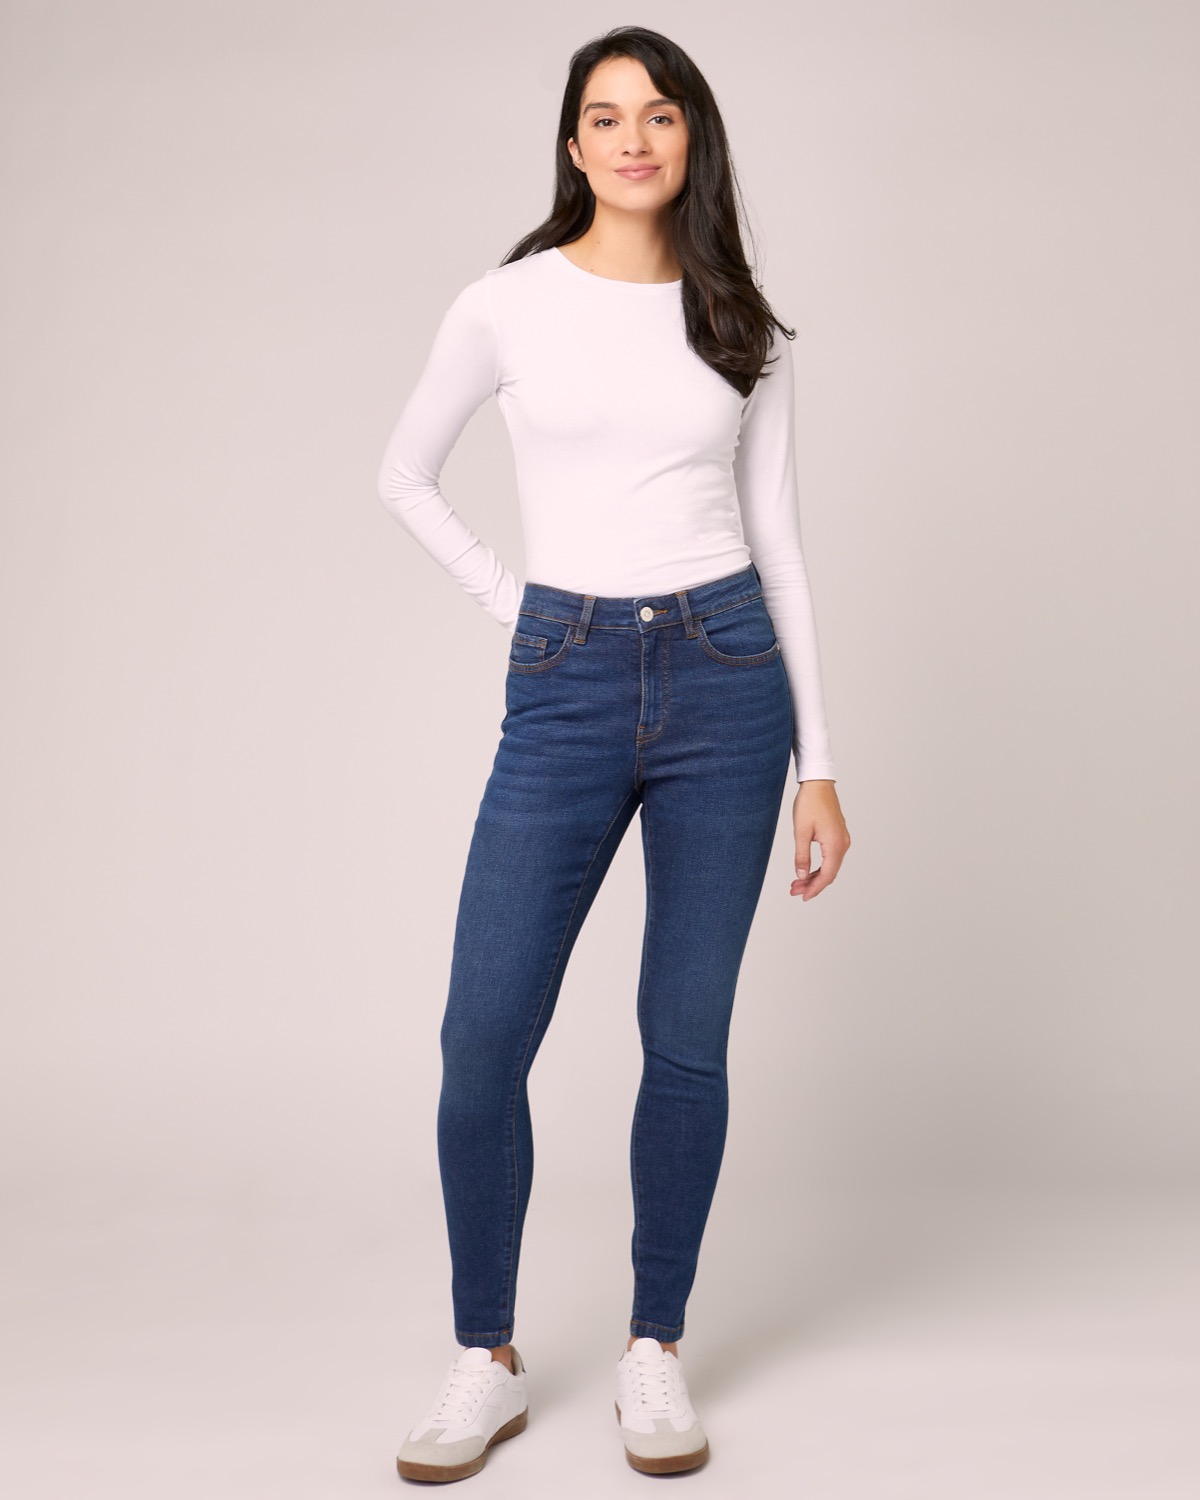 Dunnes Stores  Period Pants Buying Guide